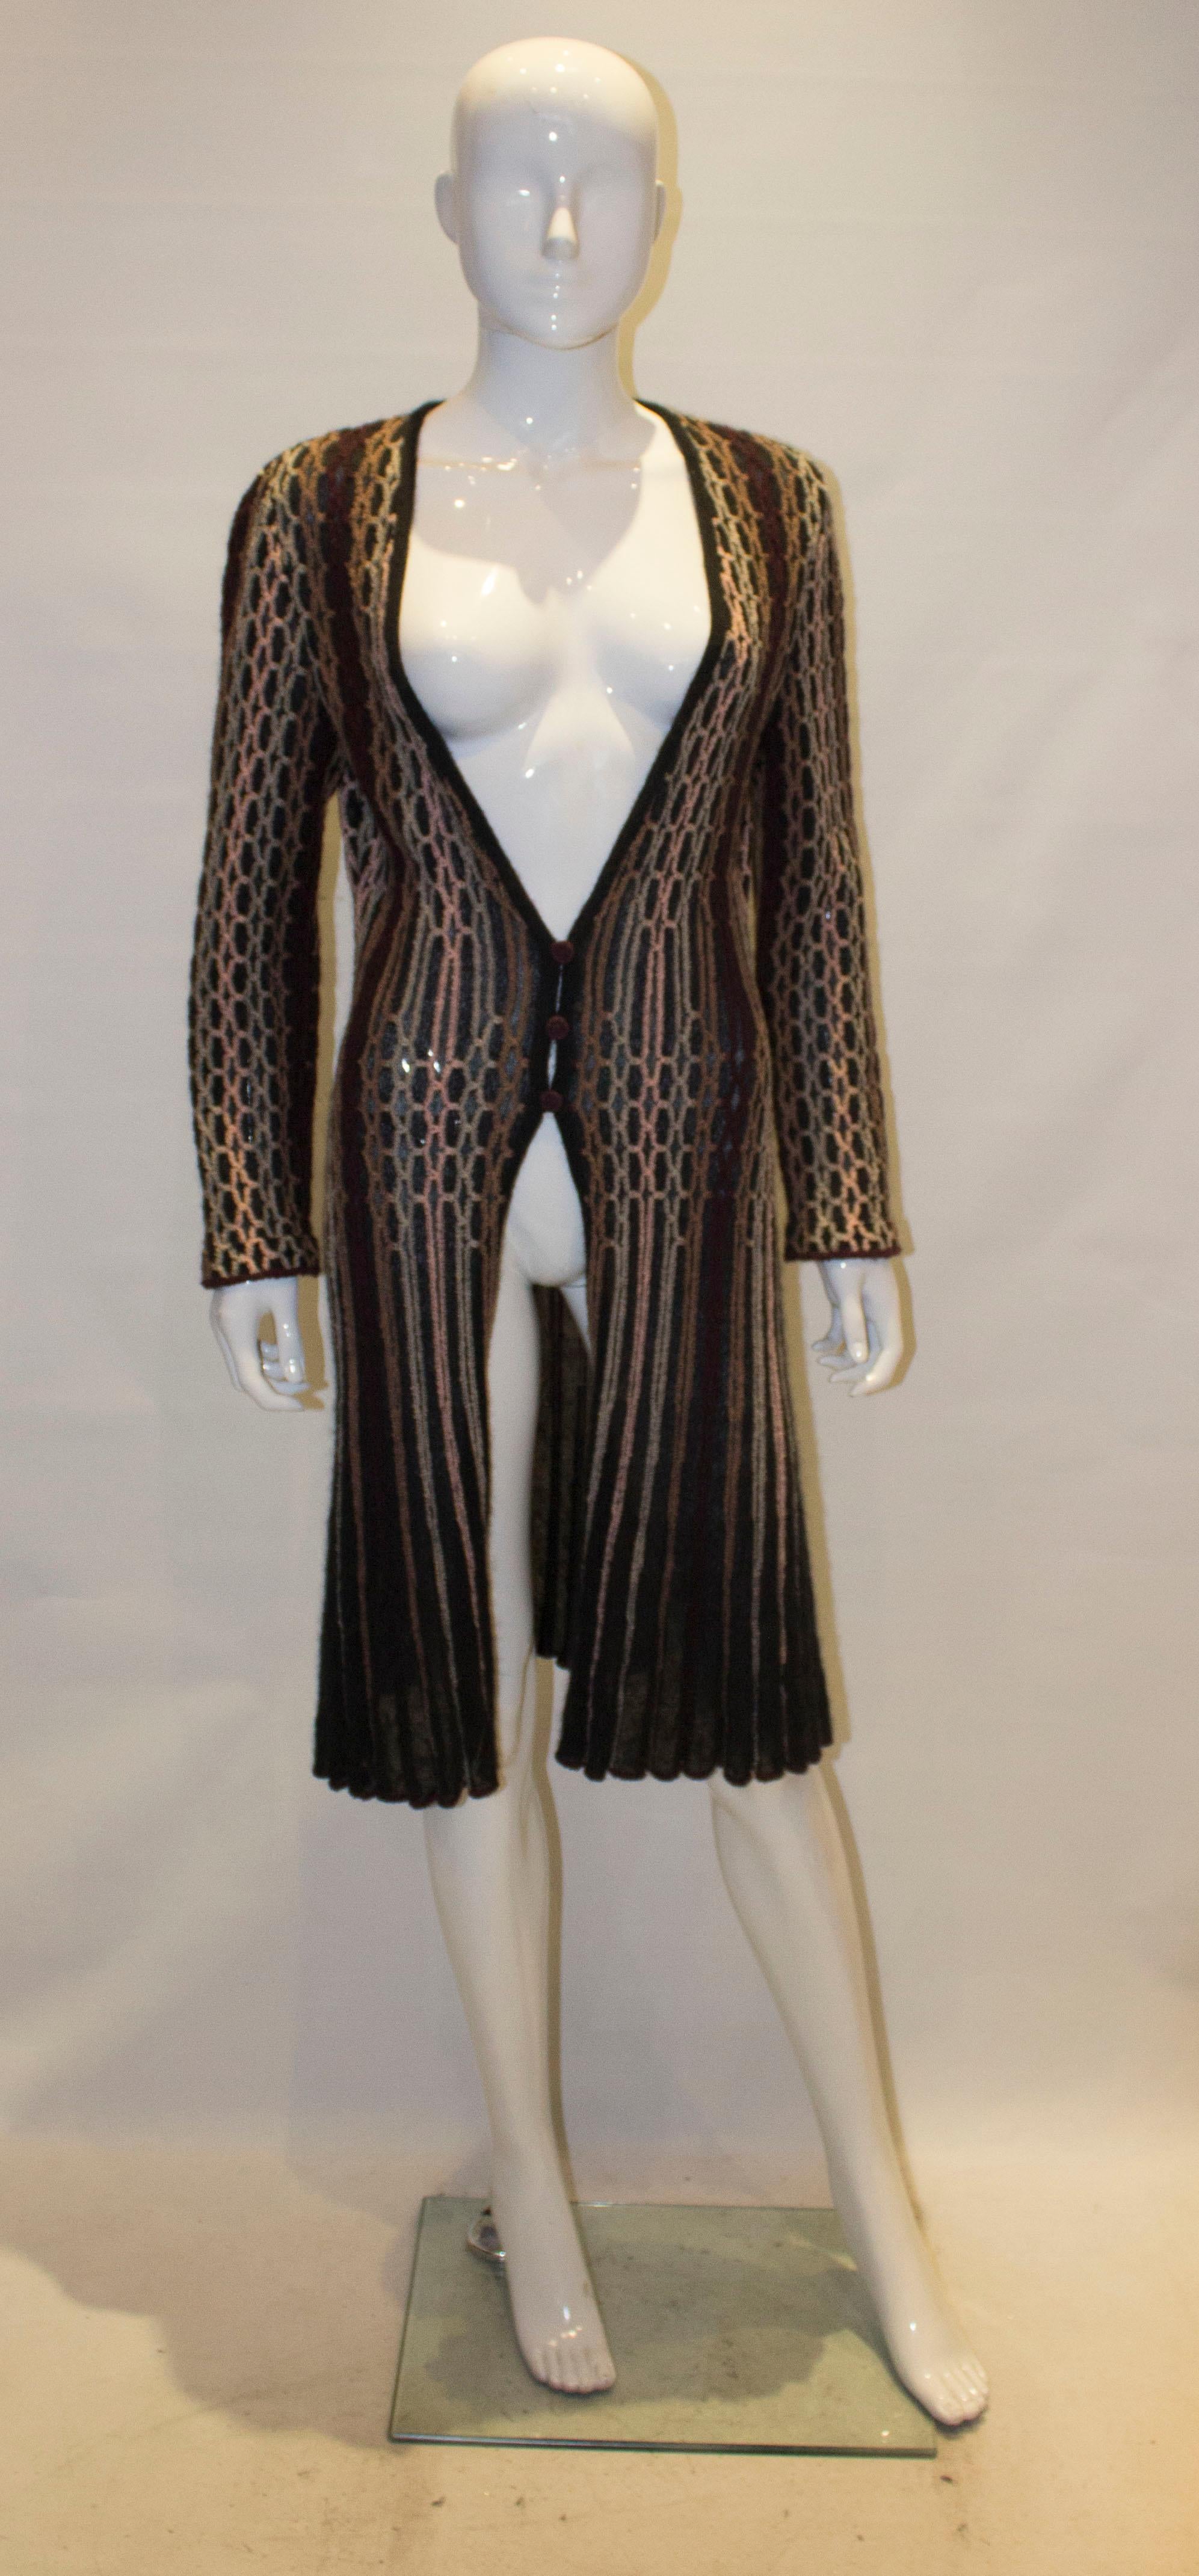 A vintage Missoni Brown Label Cardigan /Jacket . The jacket has a black background with multicolour stripes, a v neckline and a three button front opening.